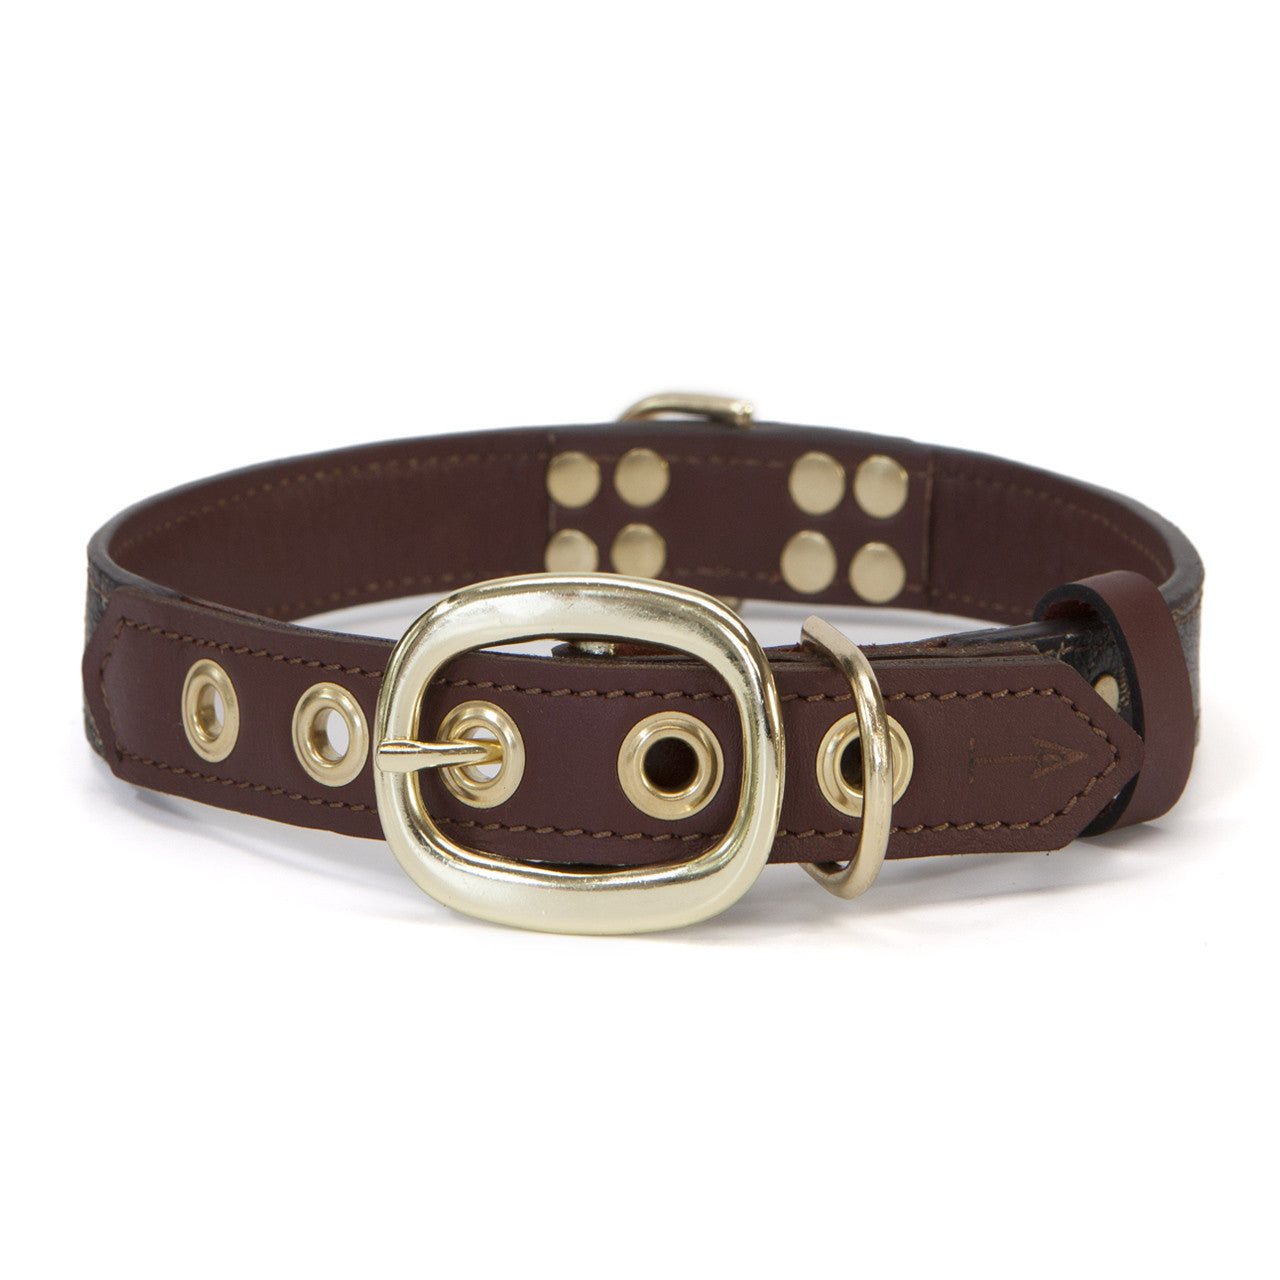 Mahogany Brown Dog Collar with Black Leather + Tan/Light Brown Stitching (back view)